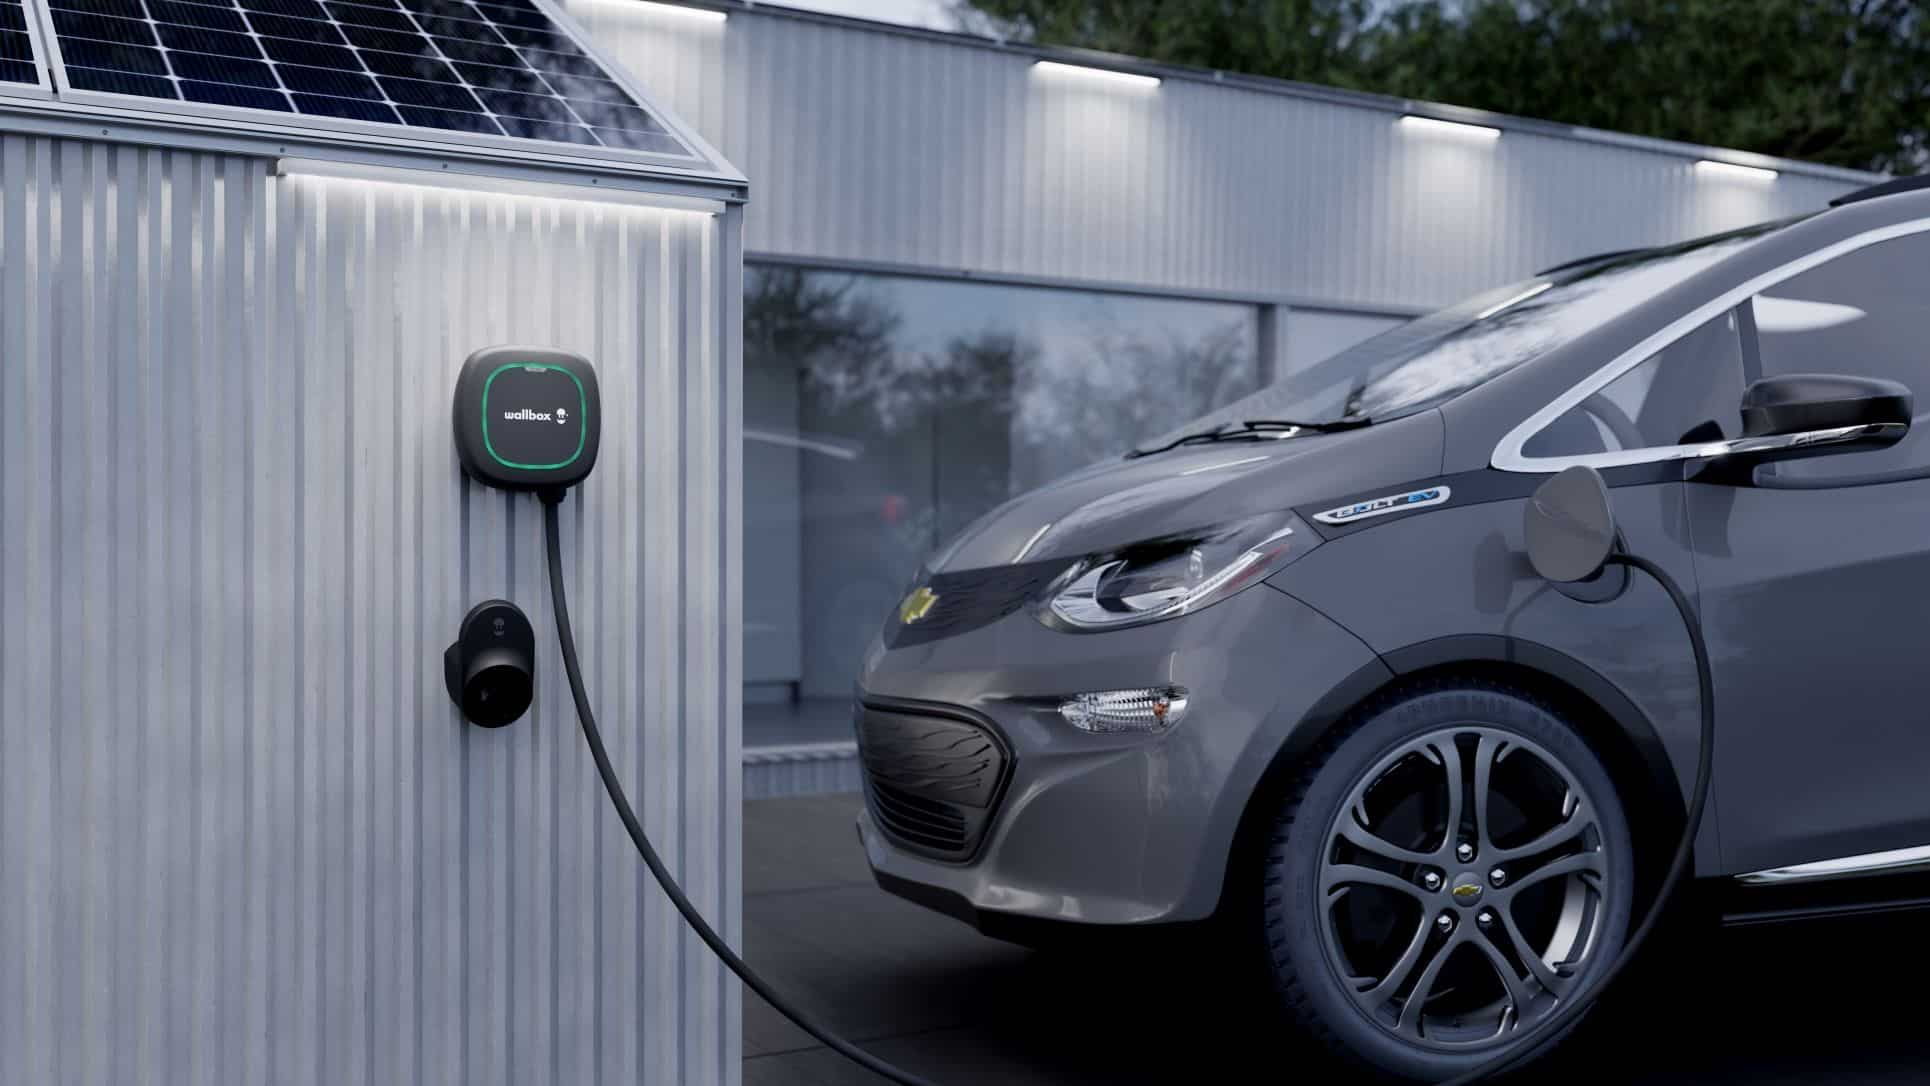 Wallbox Partners with Costco to Broaden Access to BestSelling EV